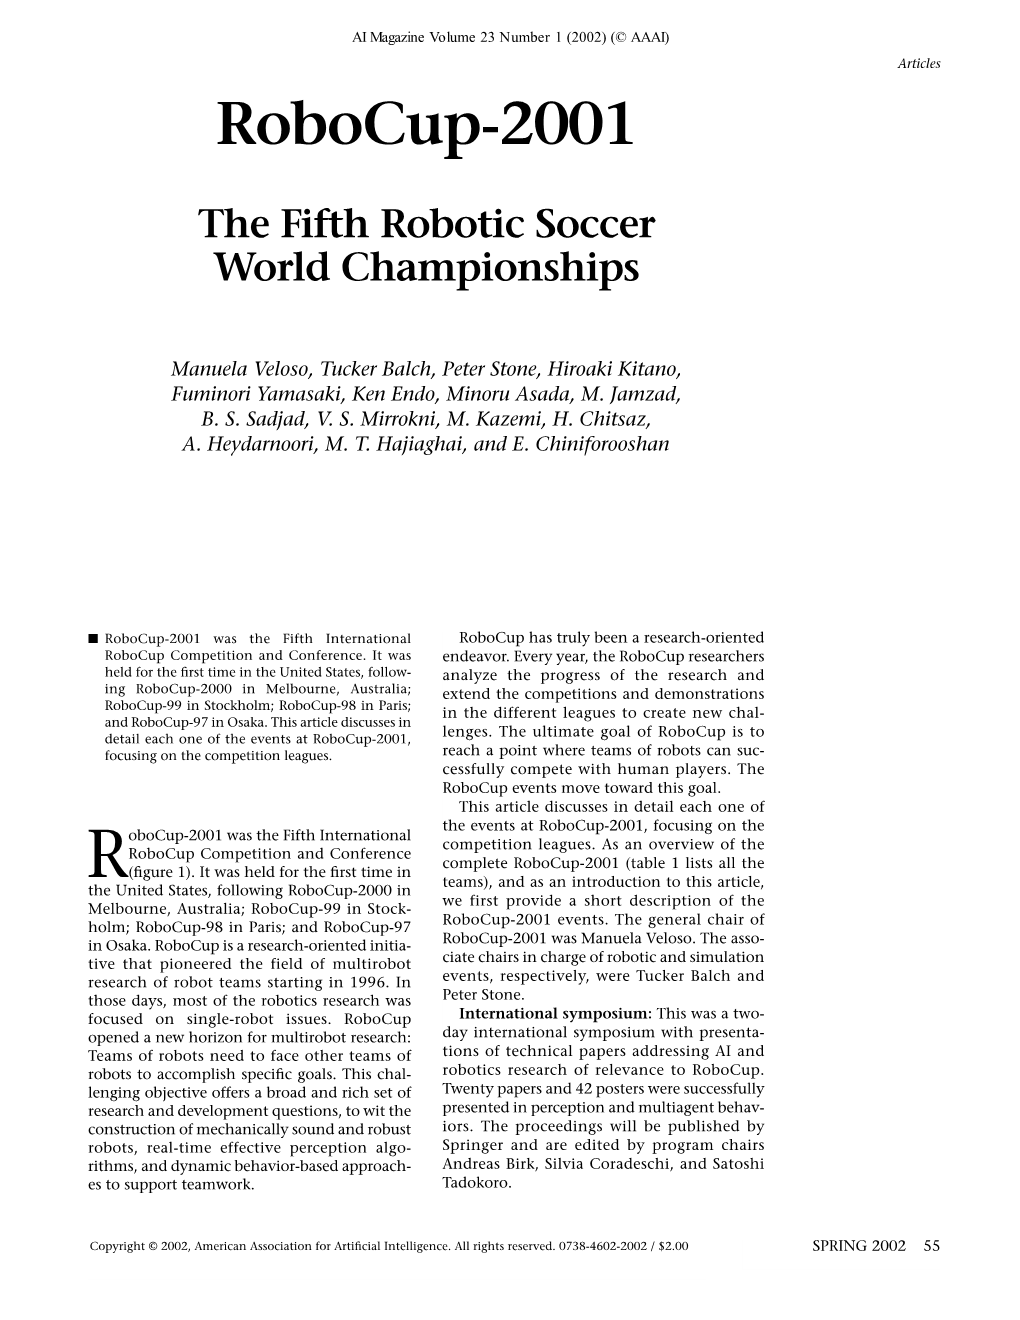 Robocup-2001: the Fifth Robotic Soccer World Competitions